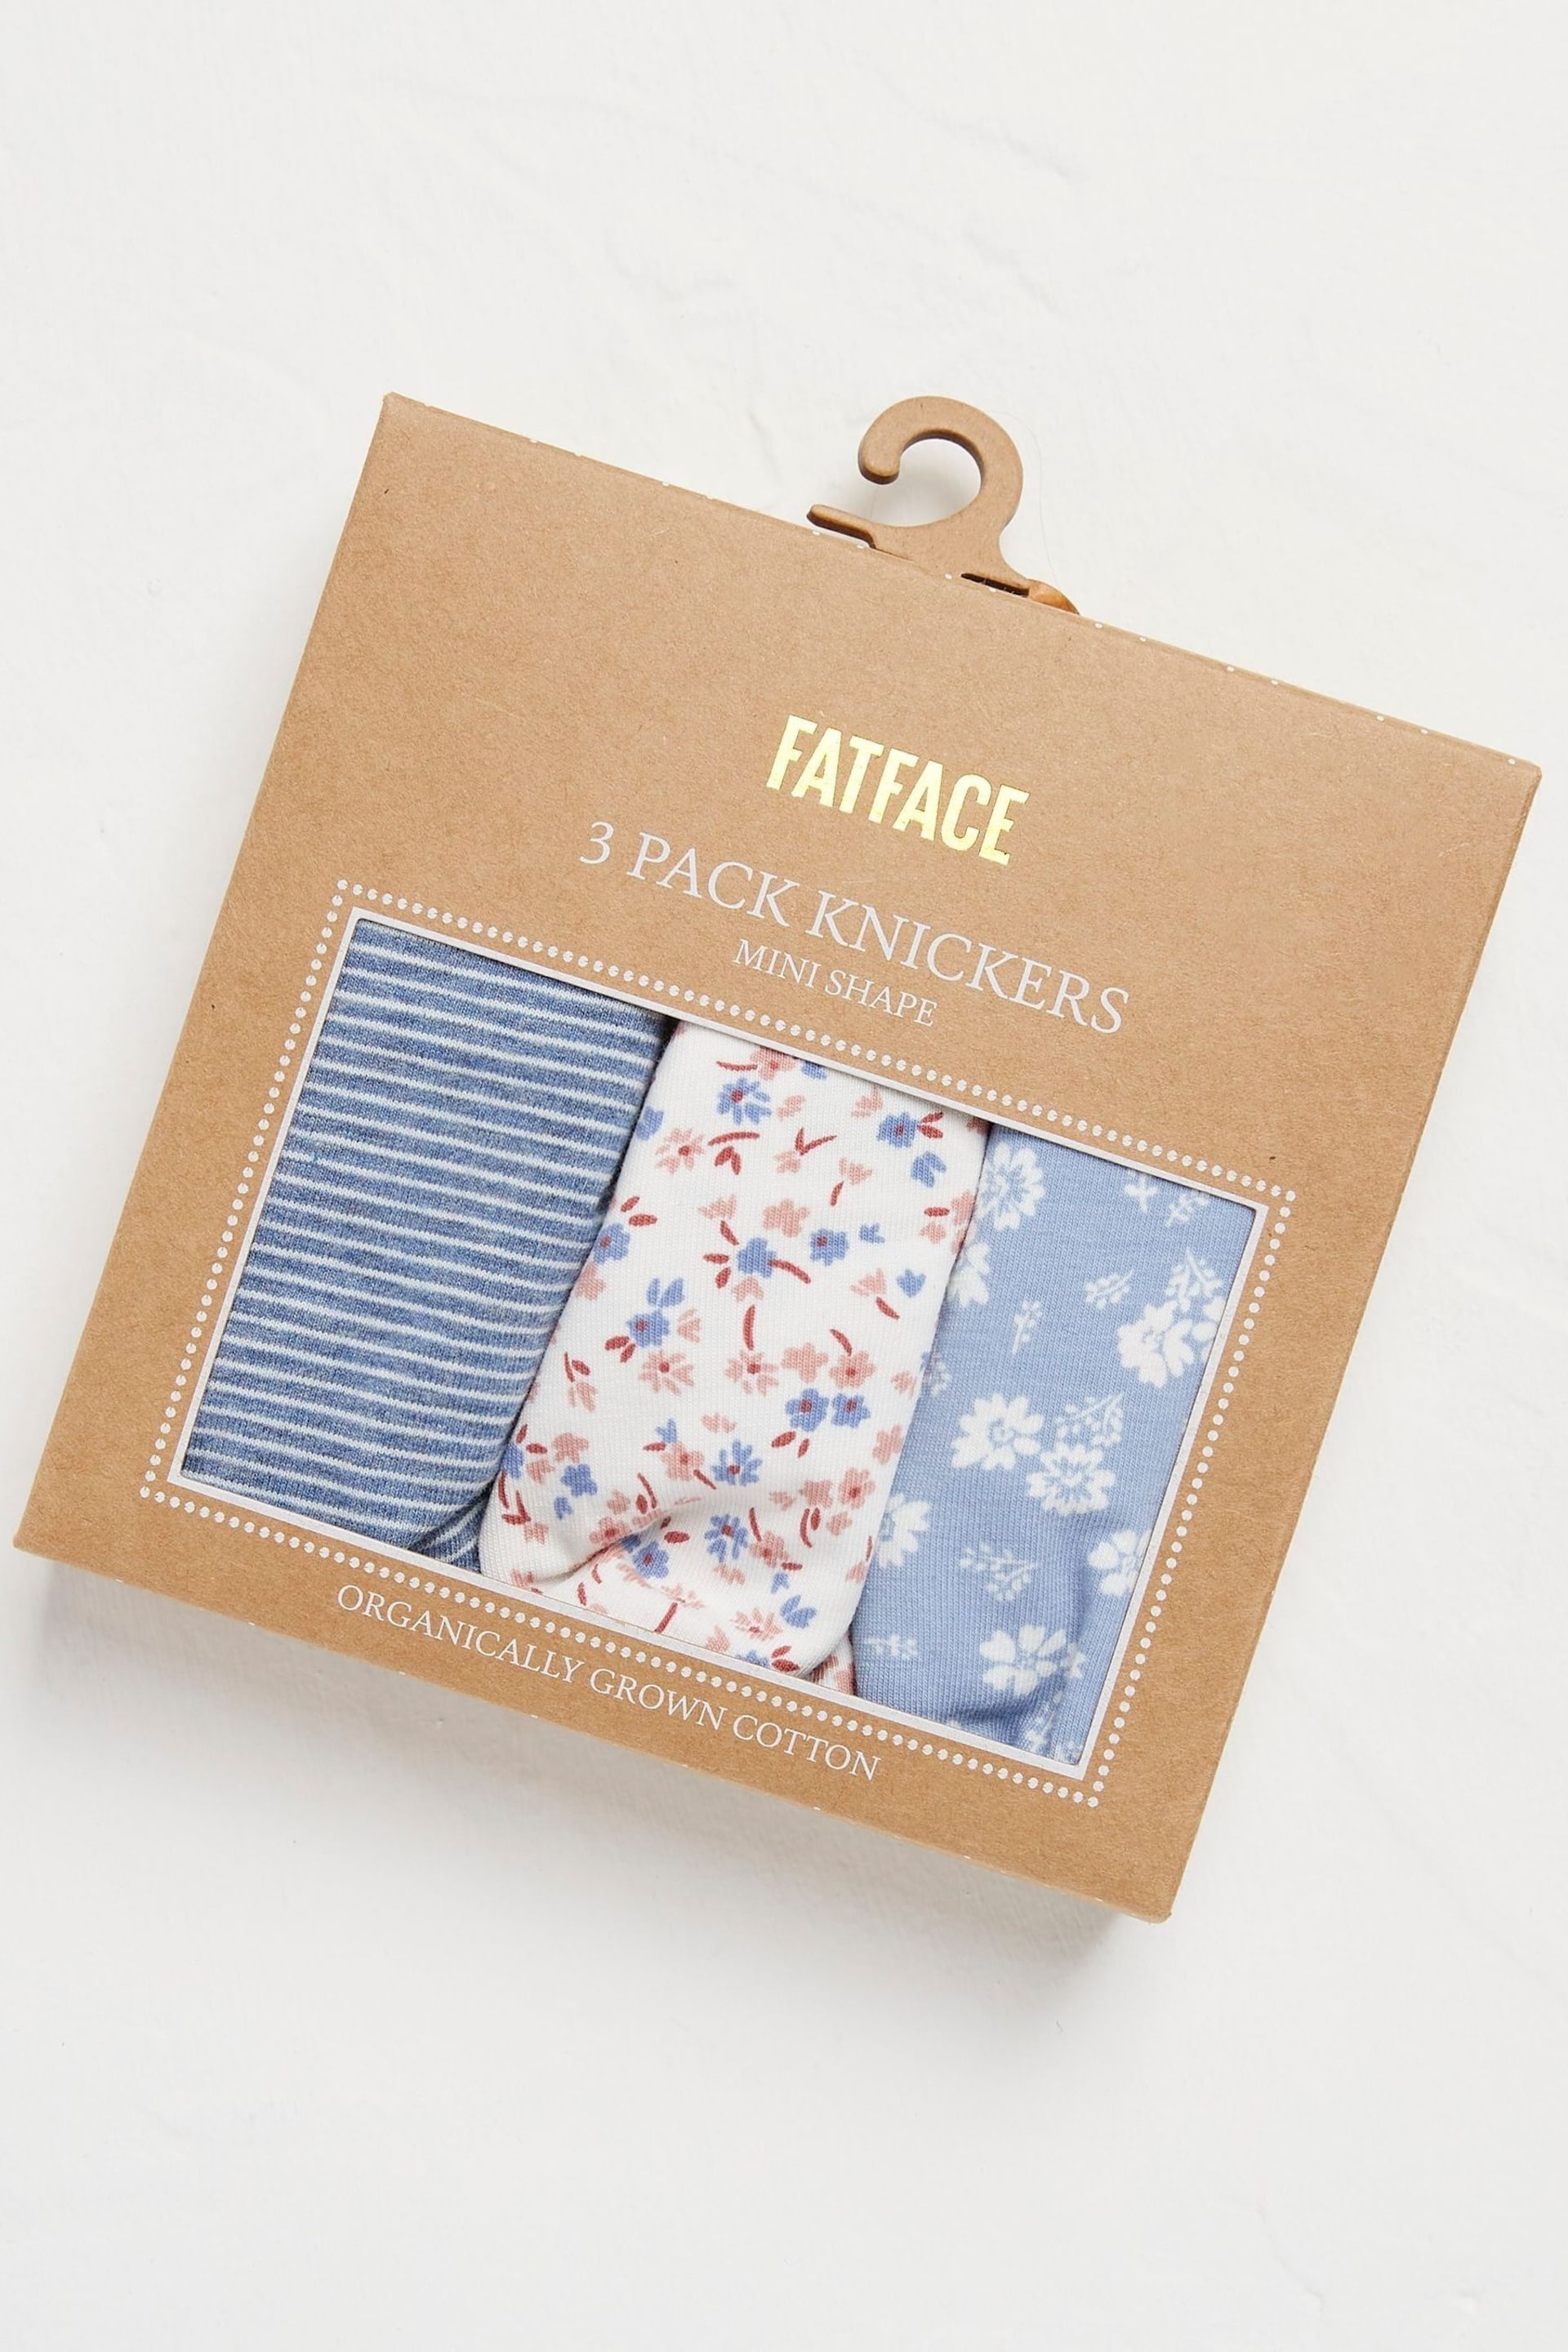 FatFace Natural Floral Knickers 3 Pack - Image 2 of 2